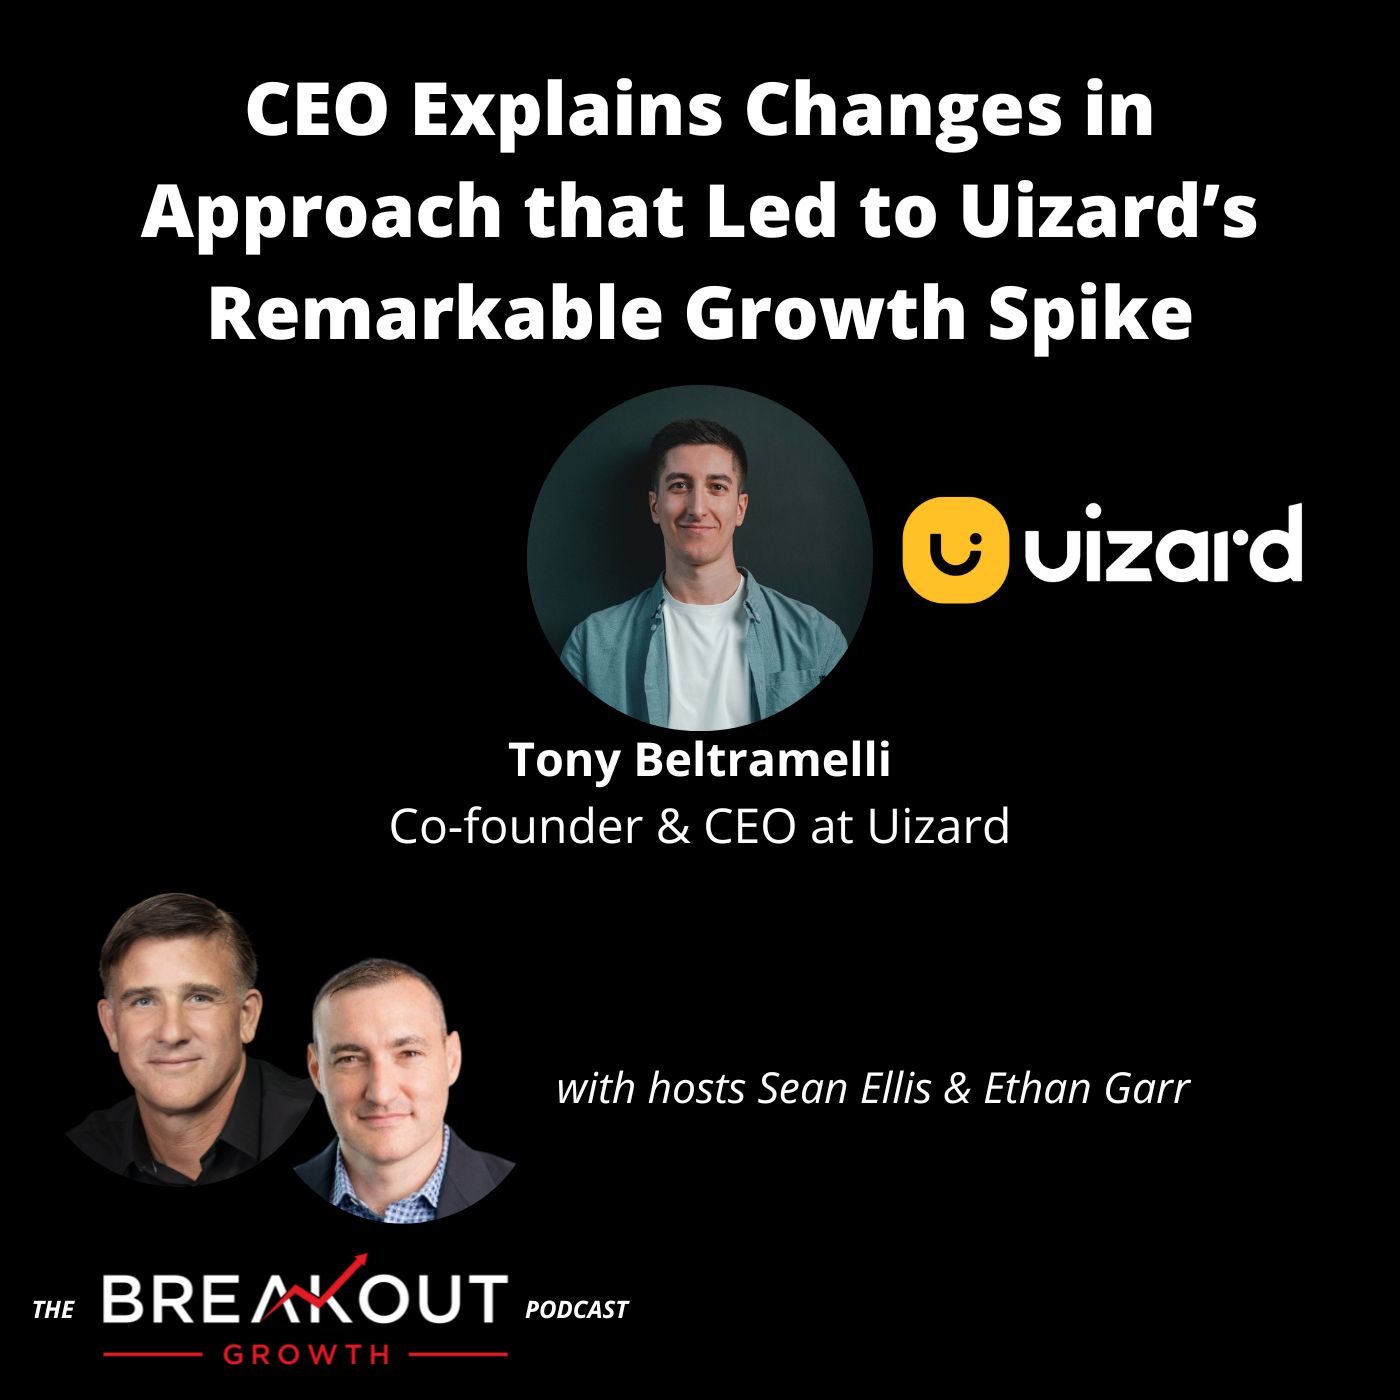 CEO Explains Changes in Approach that Led to Uizard’s Remarkable Growth Spike